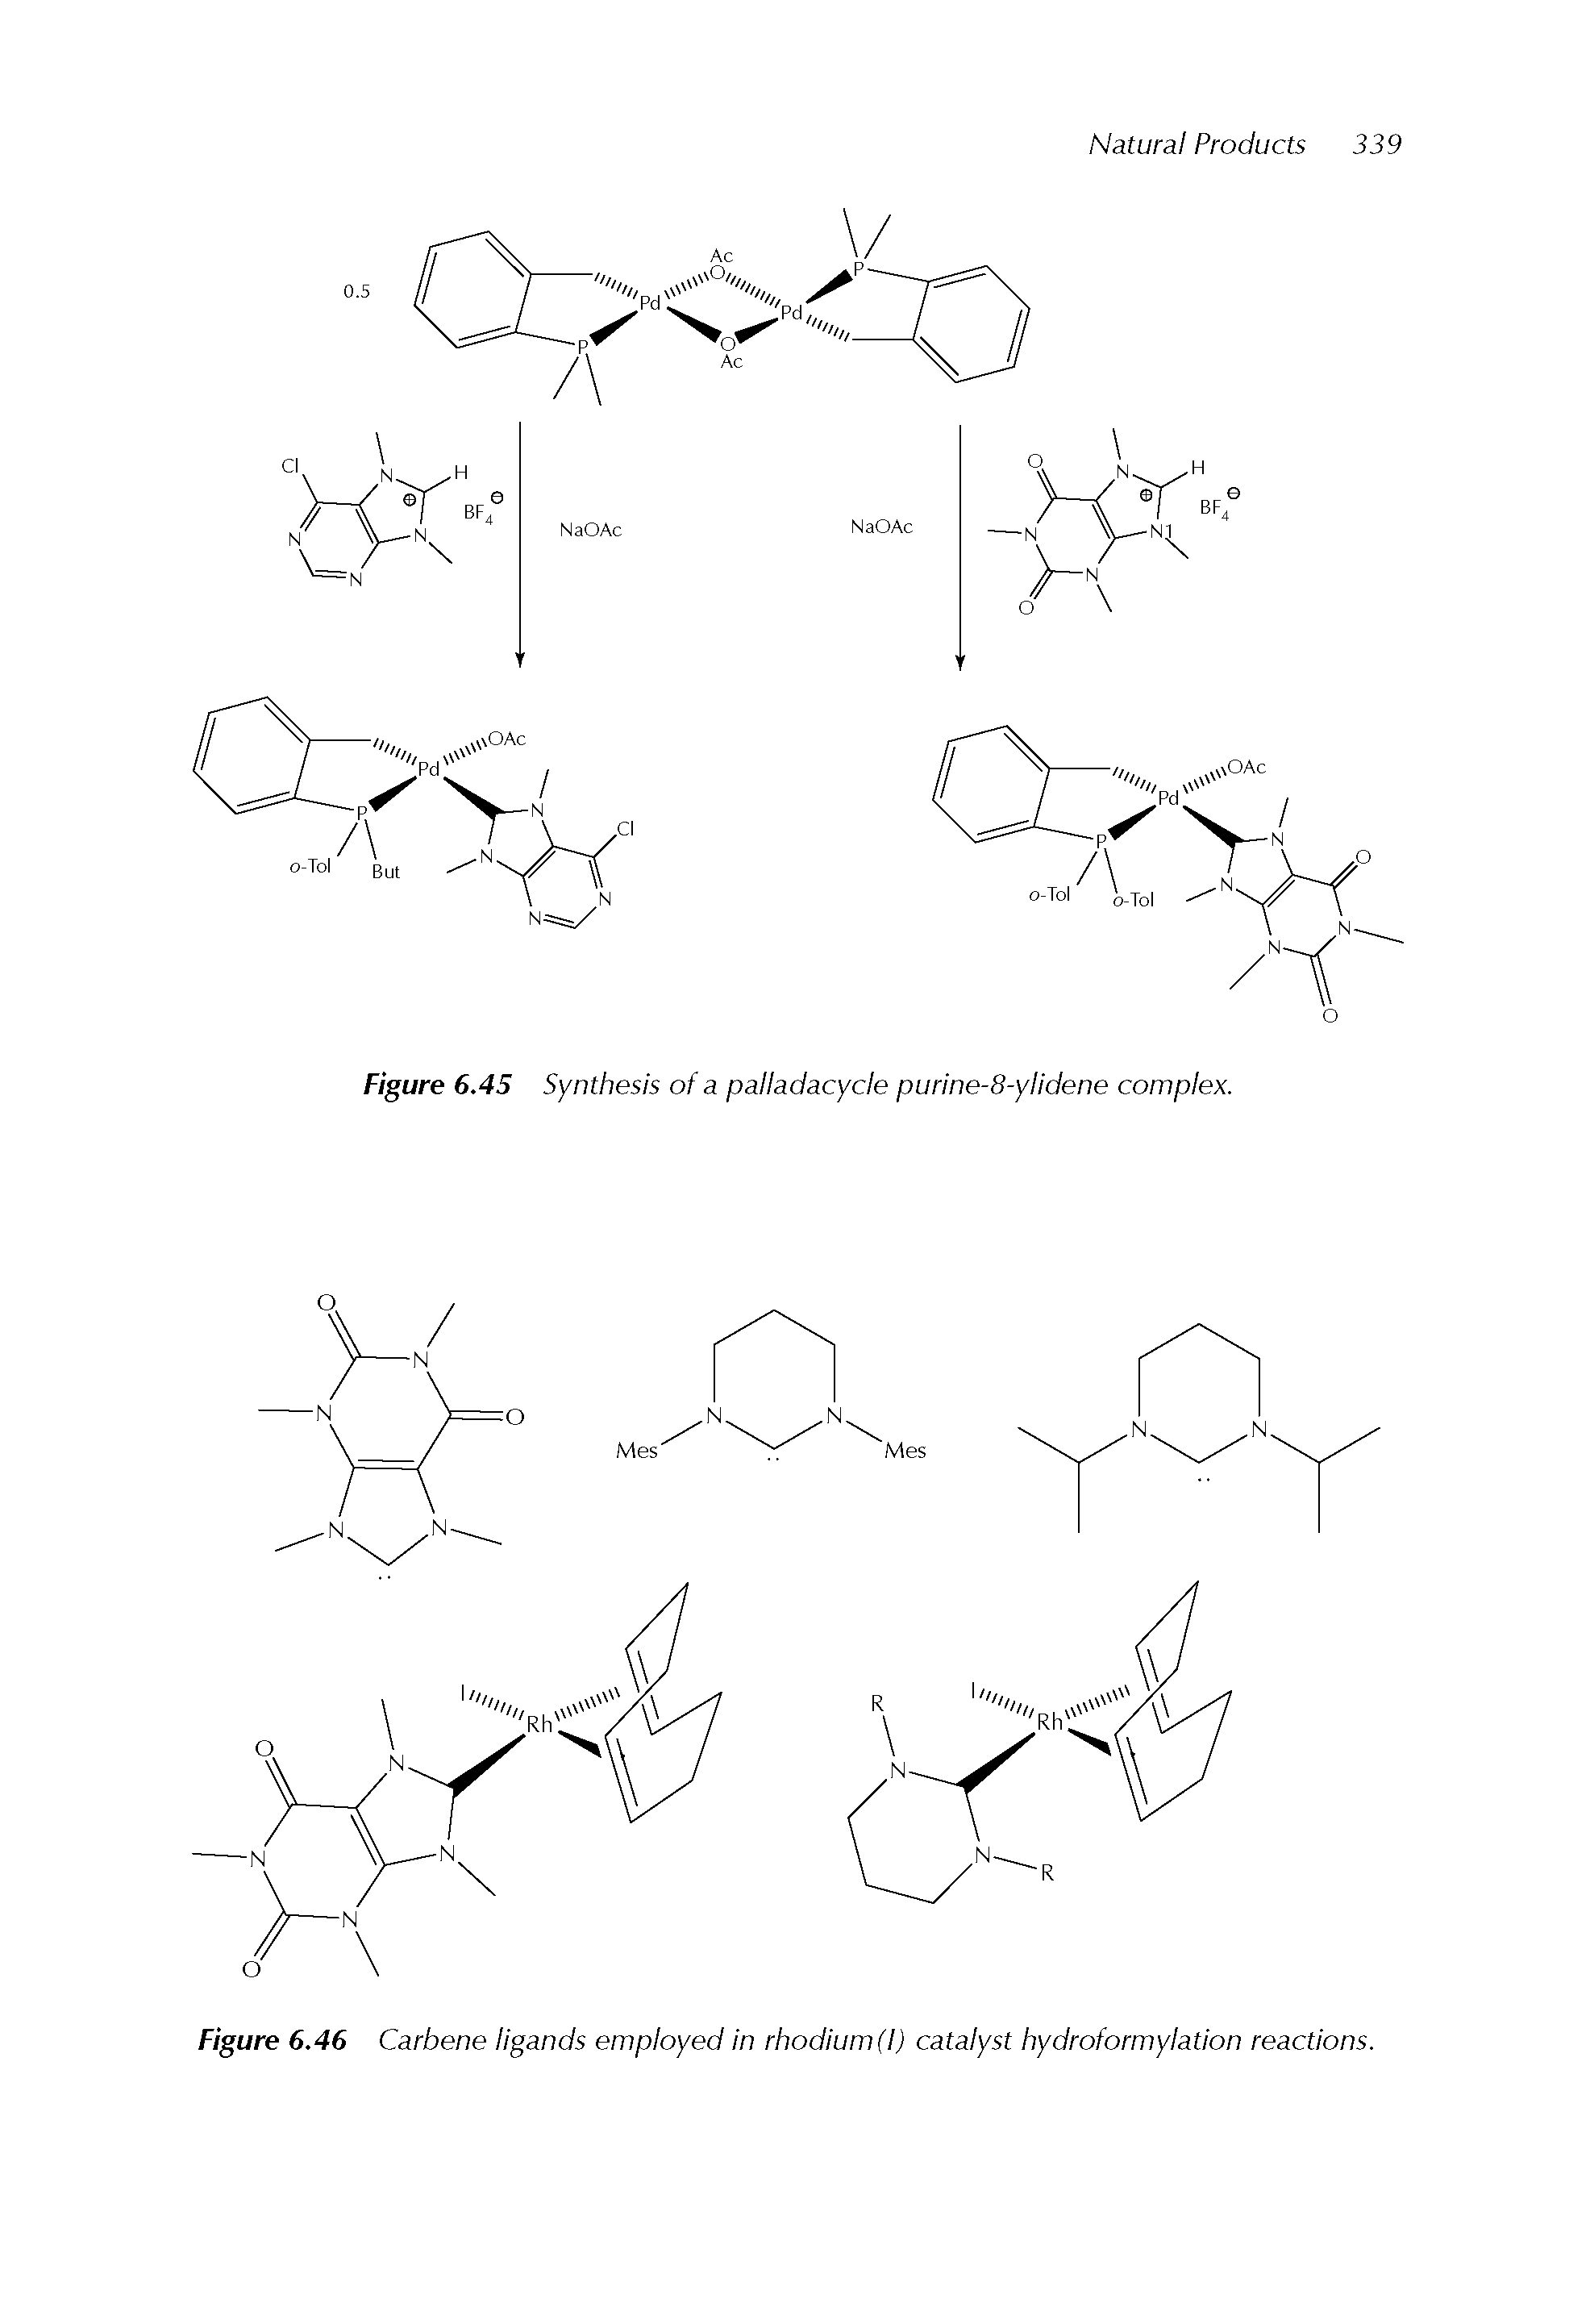 Figure 6.46 Carbene ligands employed in rhodium(l) catalyst hydroformylation reactions.